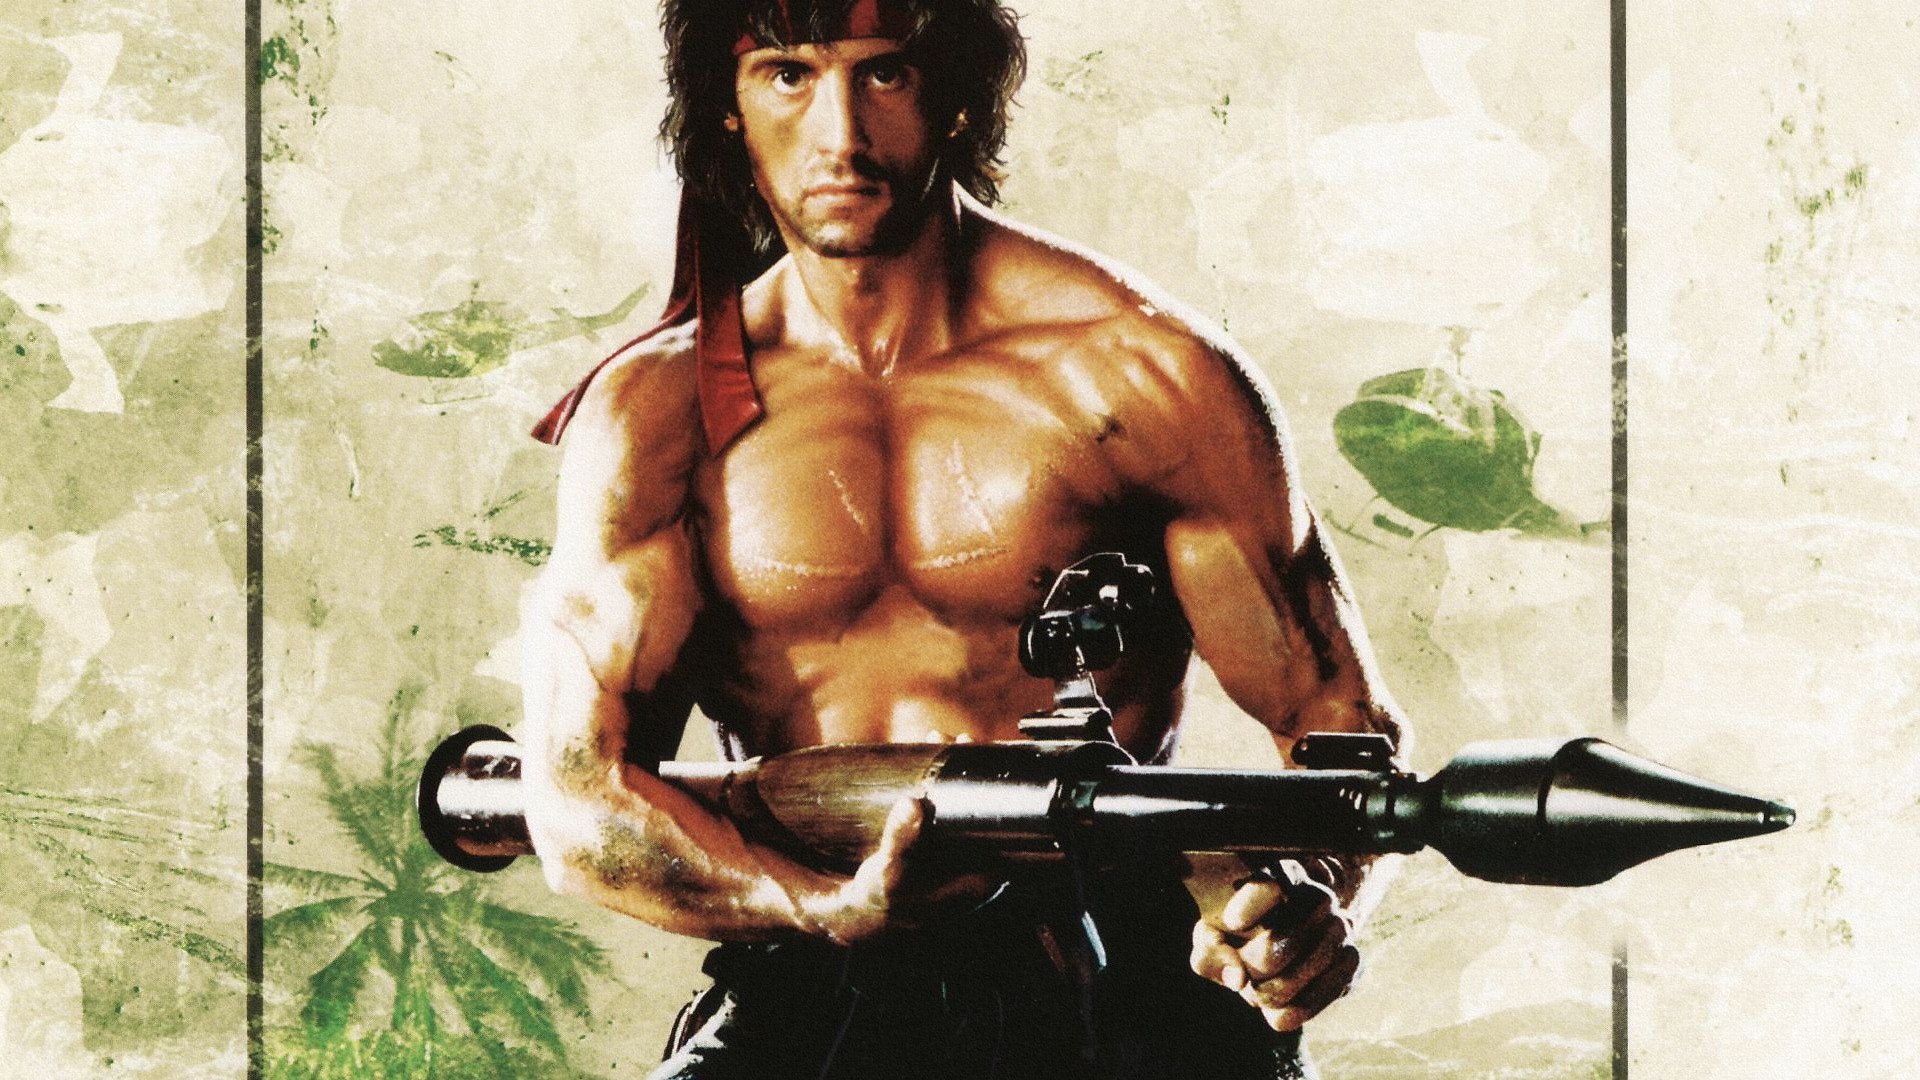 rambo wallpaper hd,bodybuilding,muscle,barechested,action film,chest